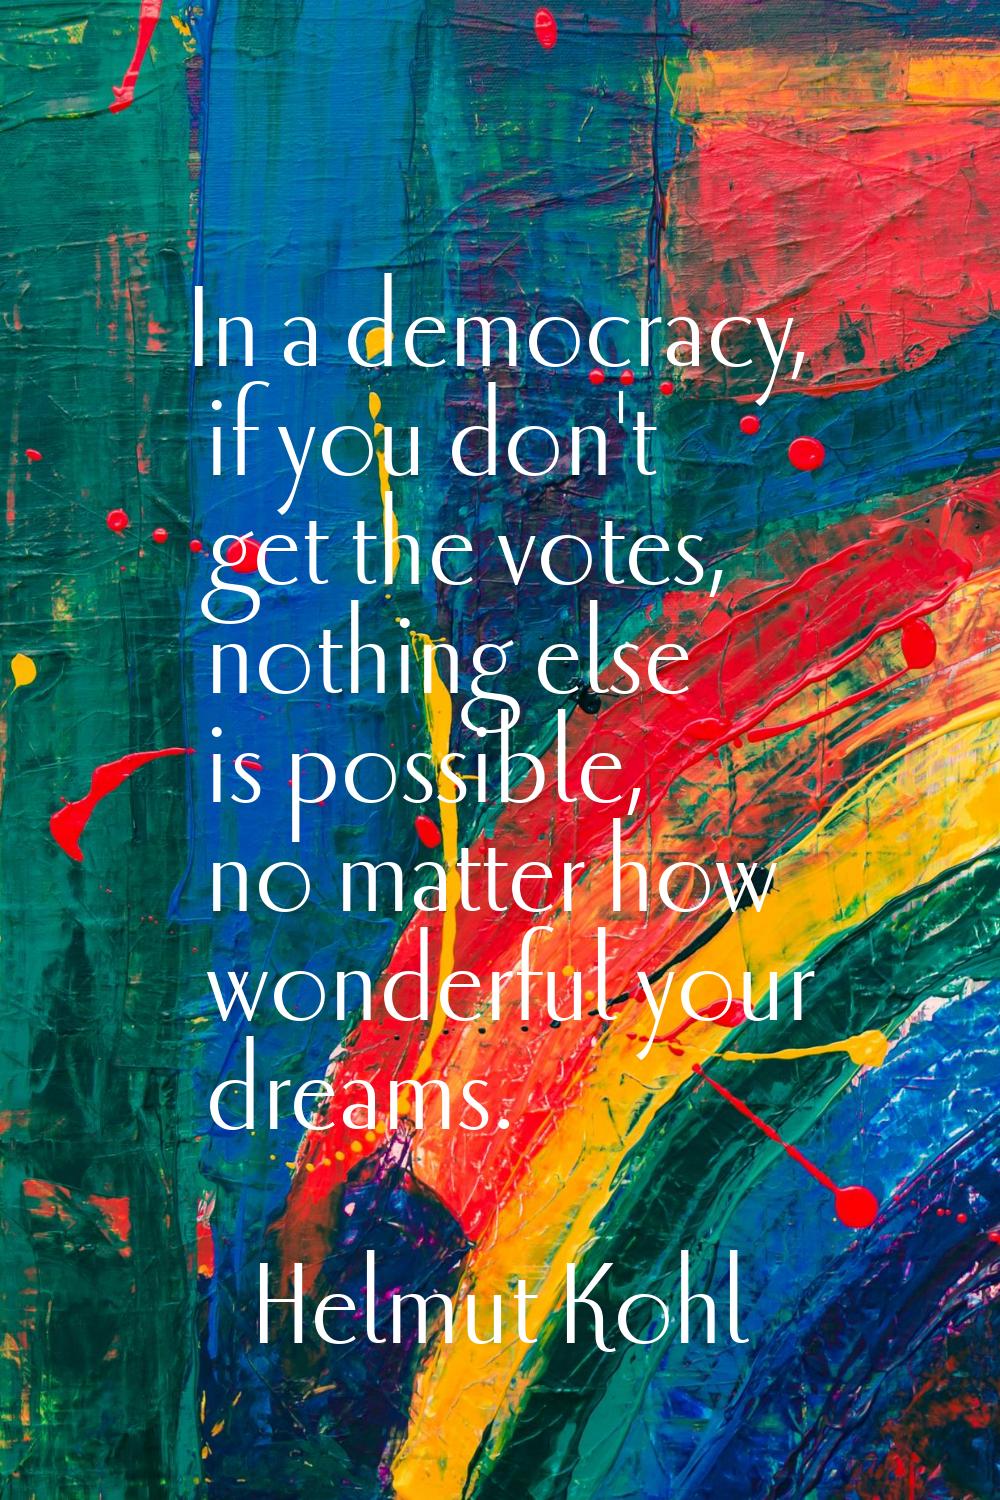 In a democracy, if you don't get the votes, nothing else is possible, no matter how wonderful your 